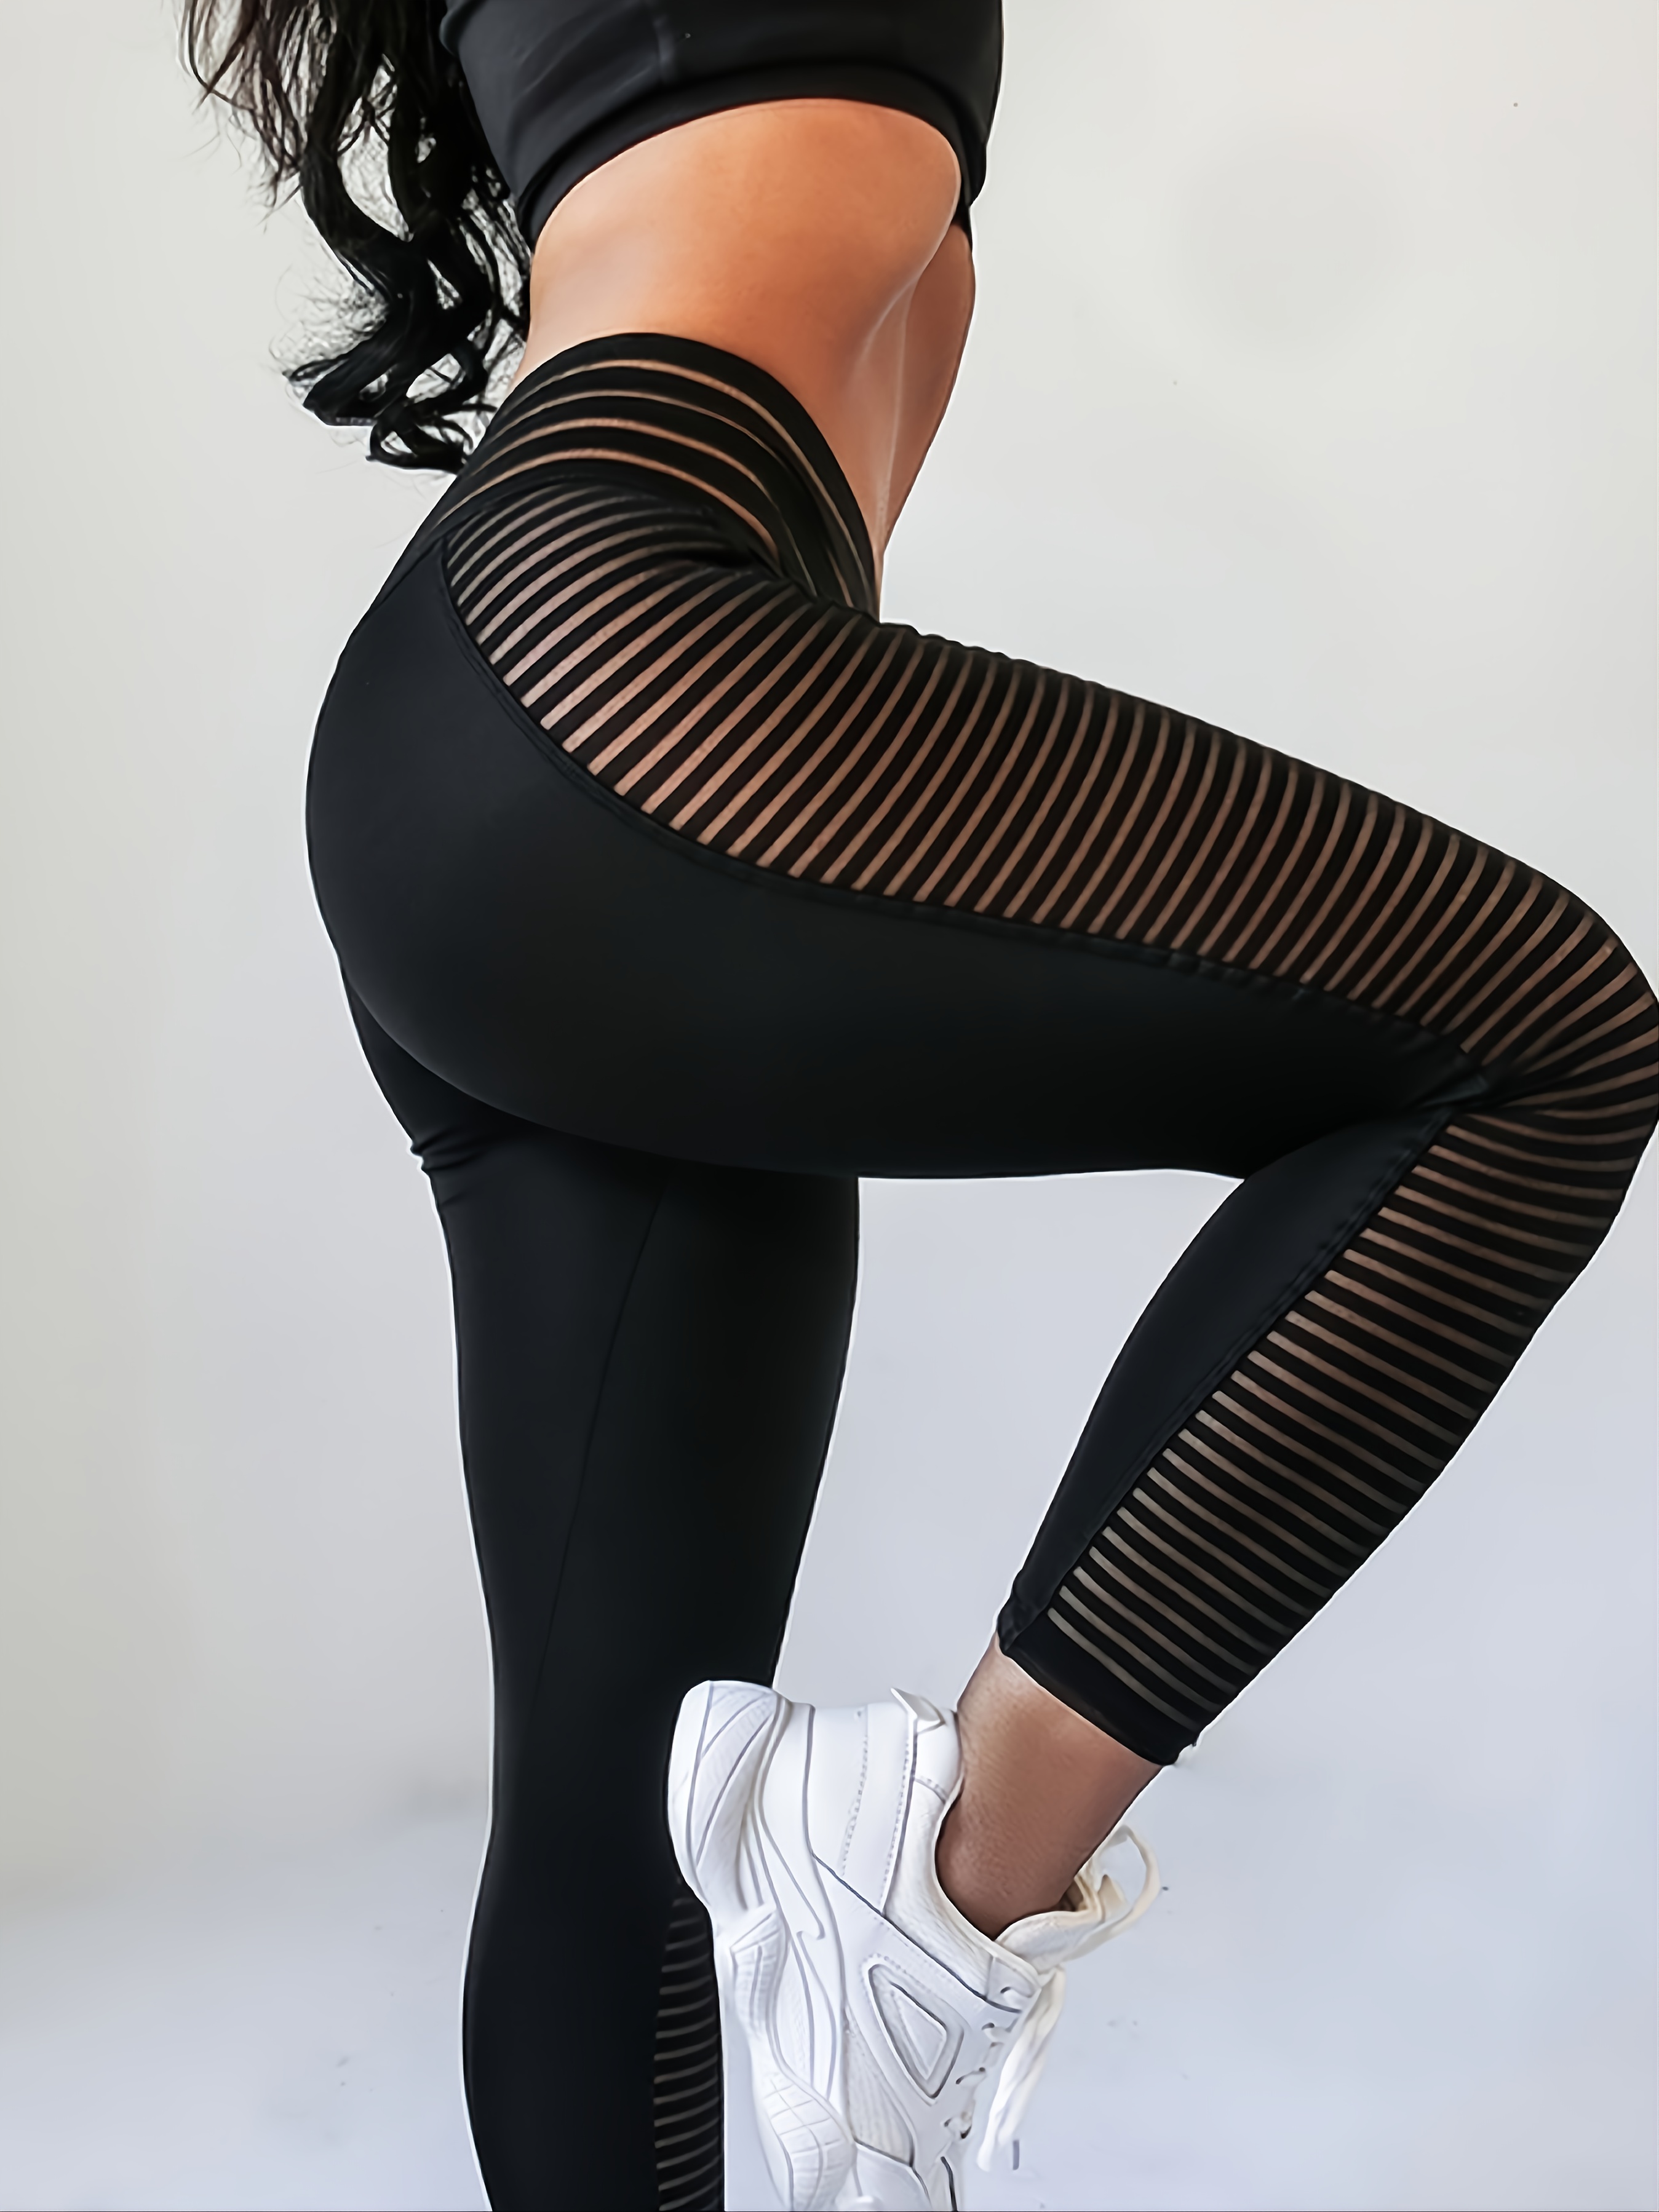 Women's Glossy Oil Bottoms Footless Tights Semi-Transparent Yoga Skinny  Pants 